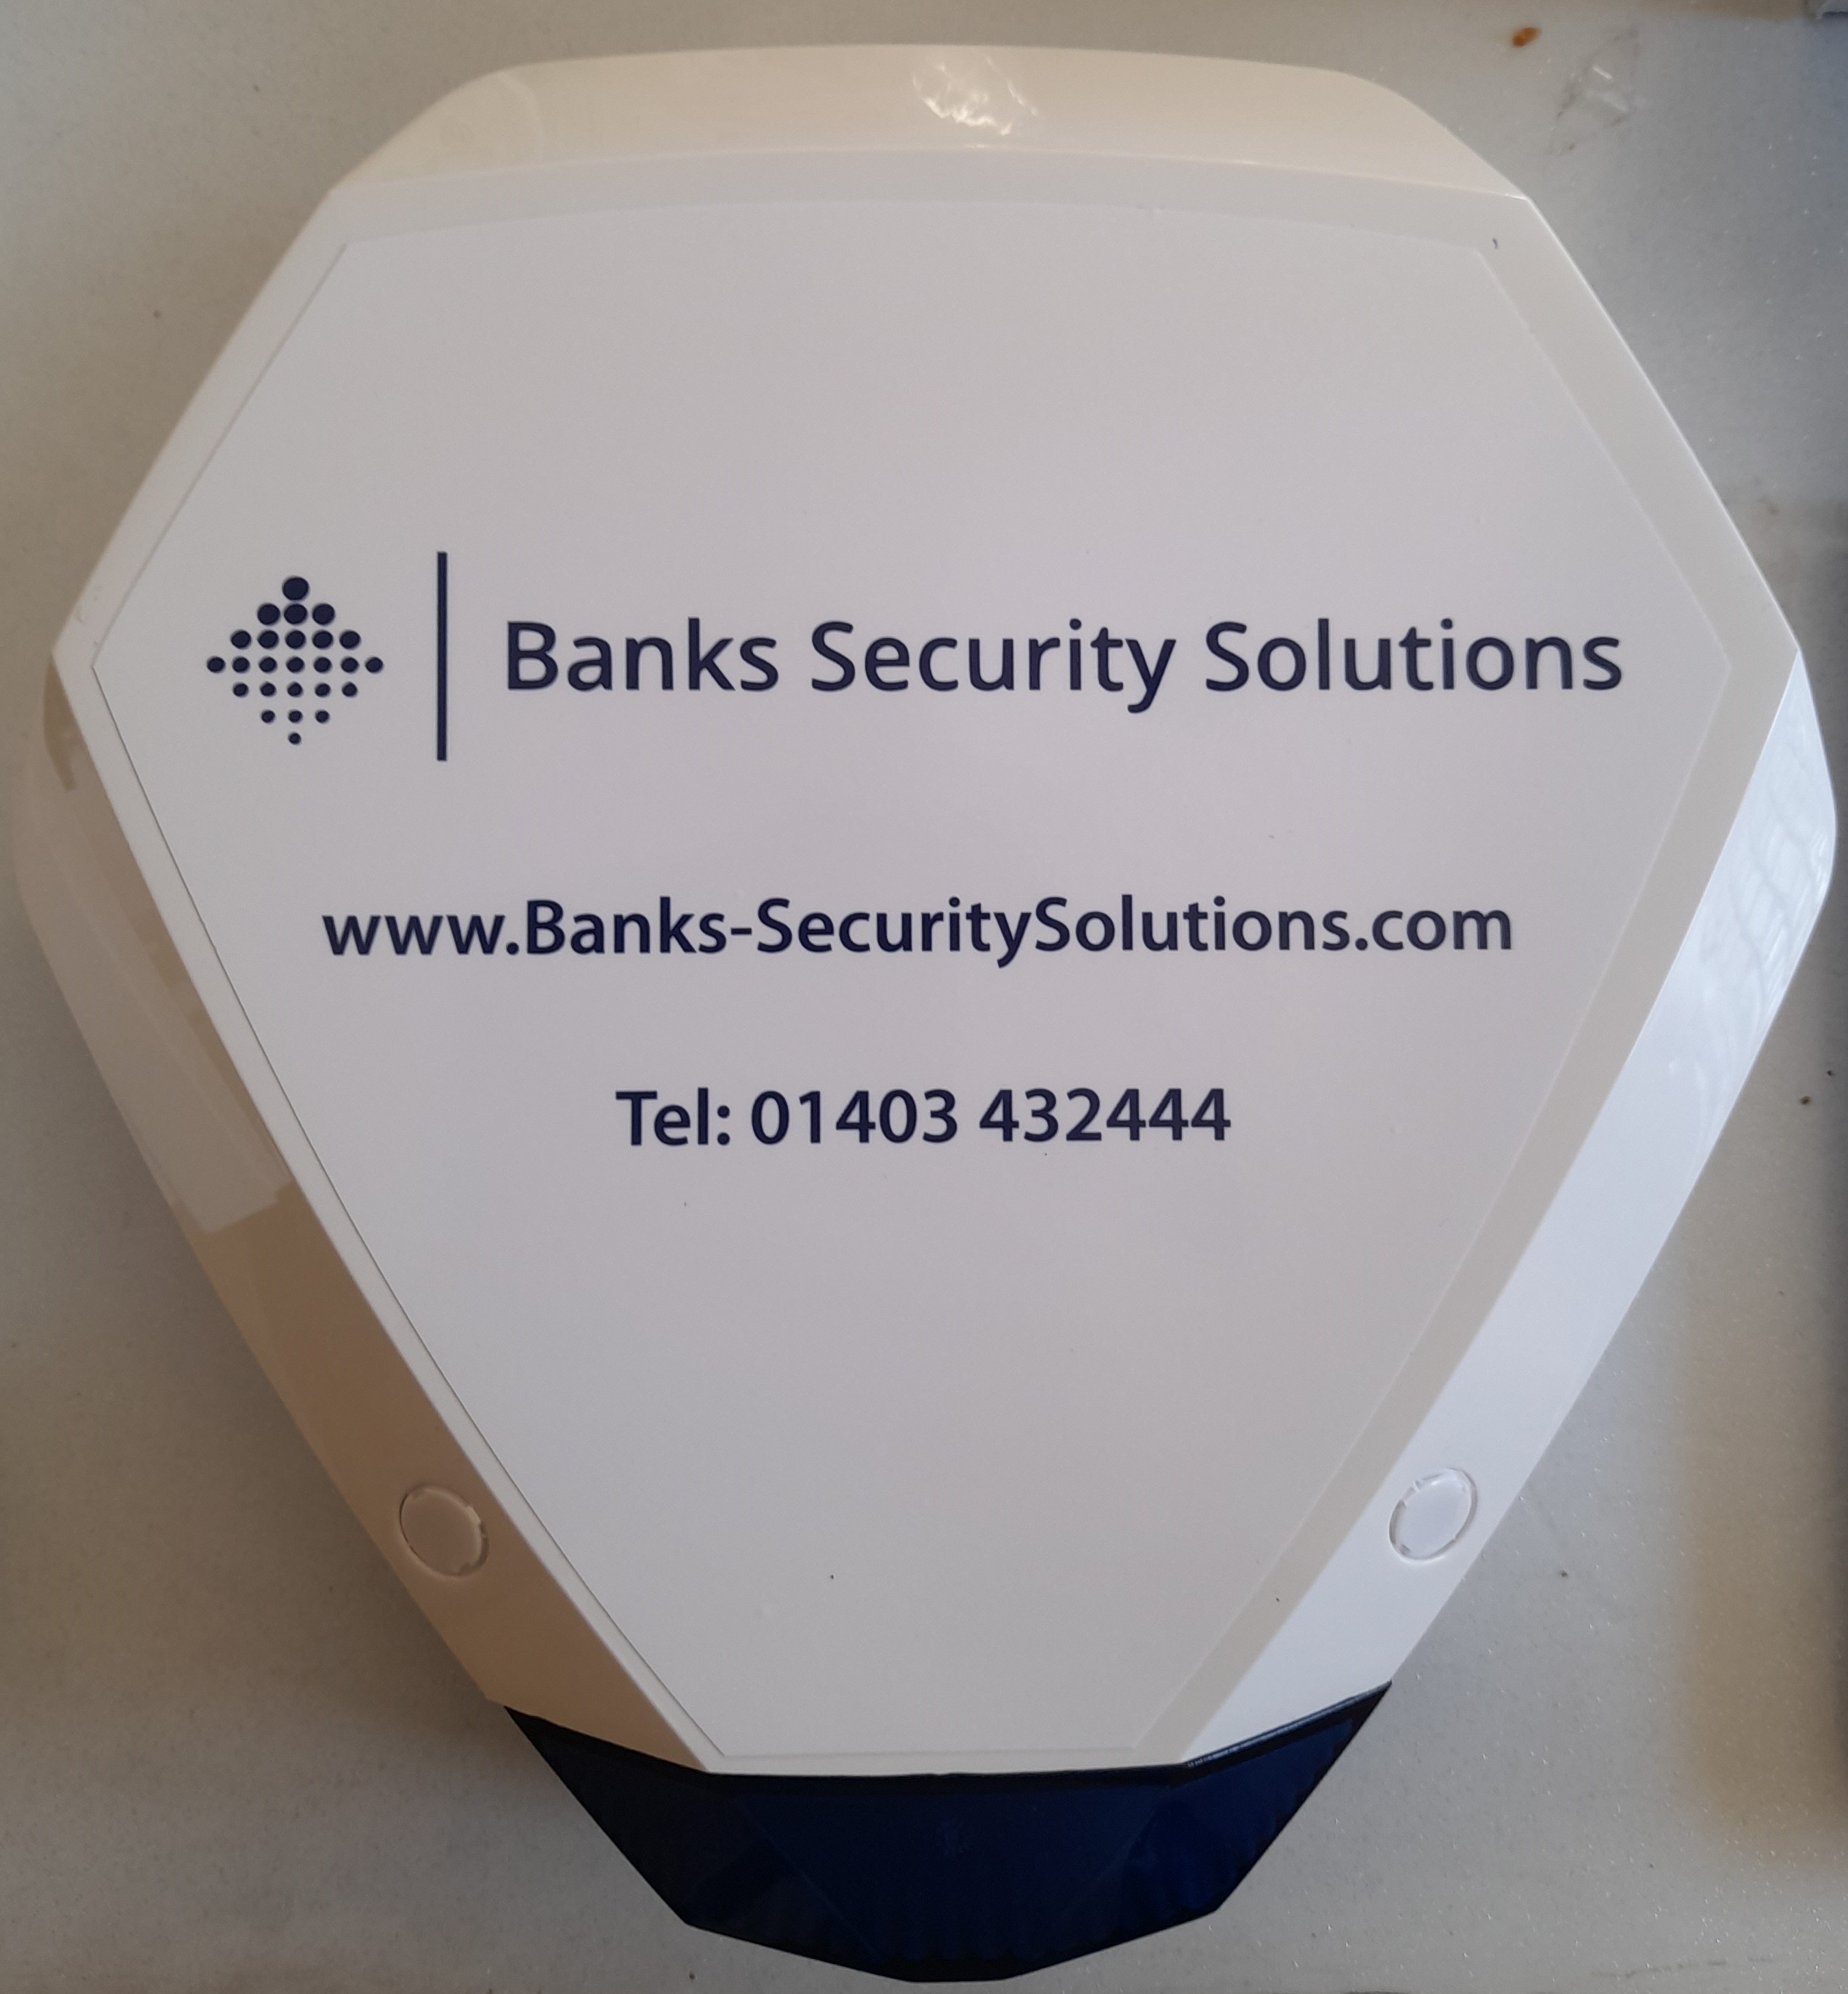 Main image for Banks Security Solutions